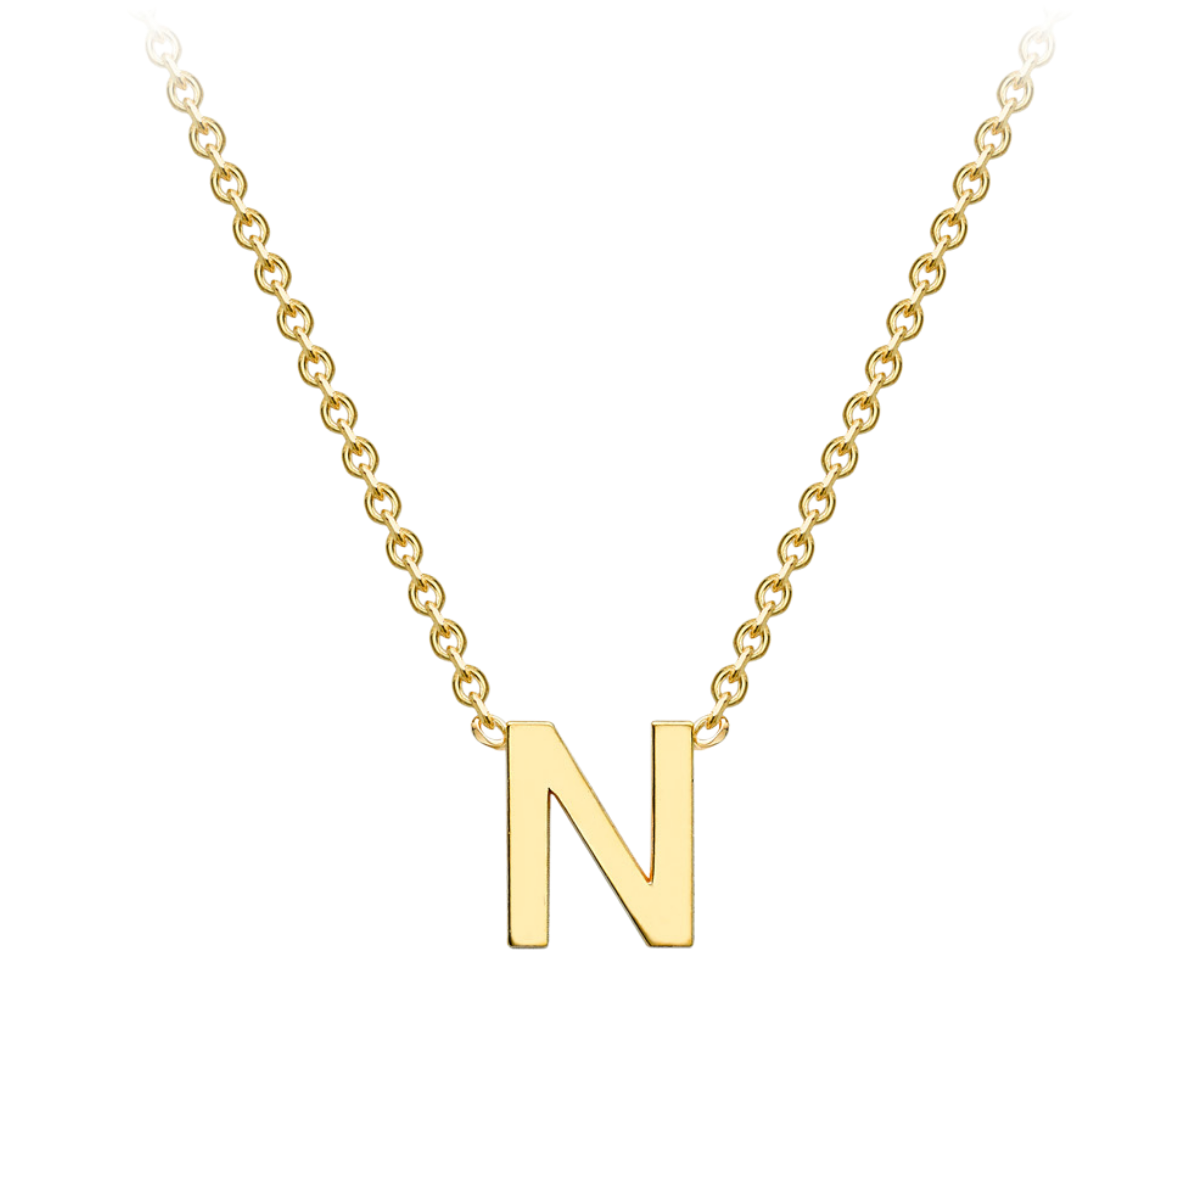 PETITE 'N' INITIAL NECKLACE | 9K SOLID GOLD